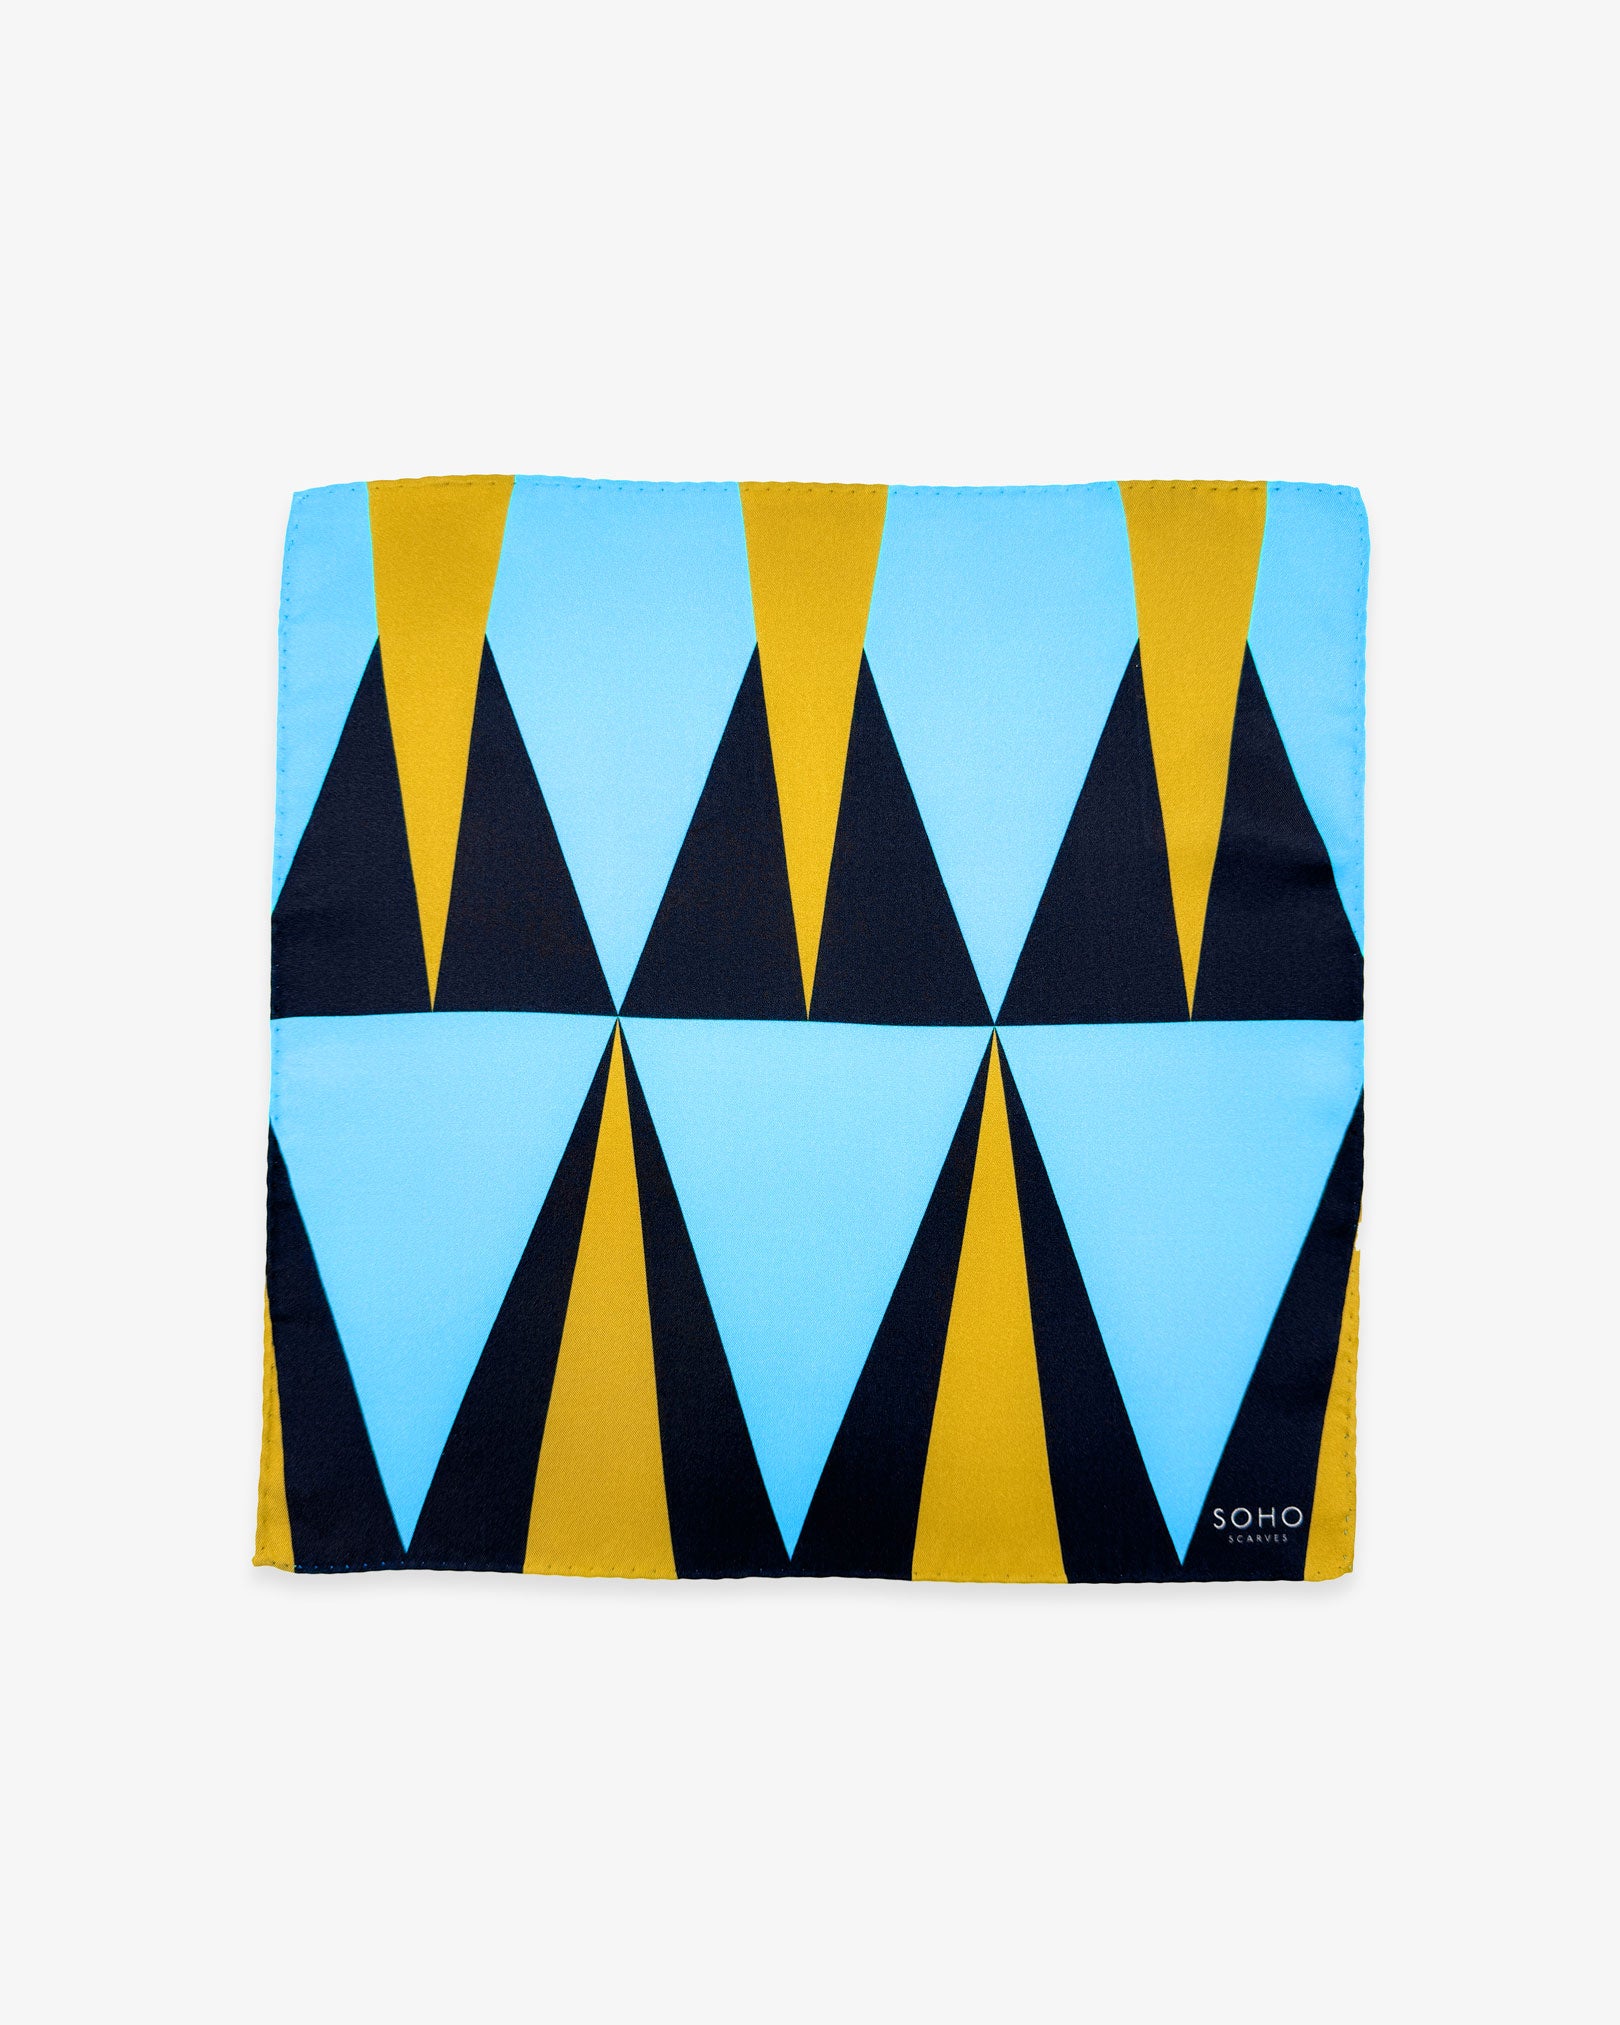 Fully unfolded 'Leipzig' silk pocket square, showing the full design of triangular shapes in pale blue, charcoal grey and yellow.